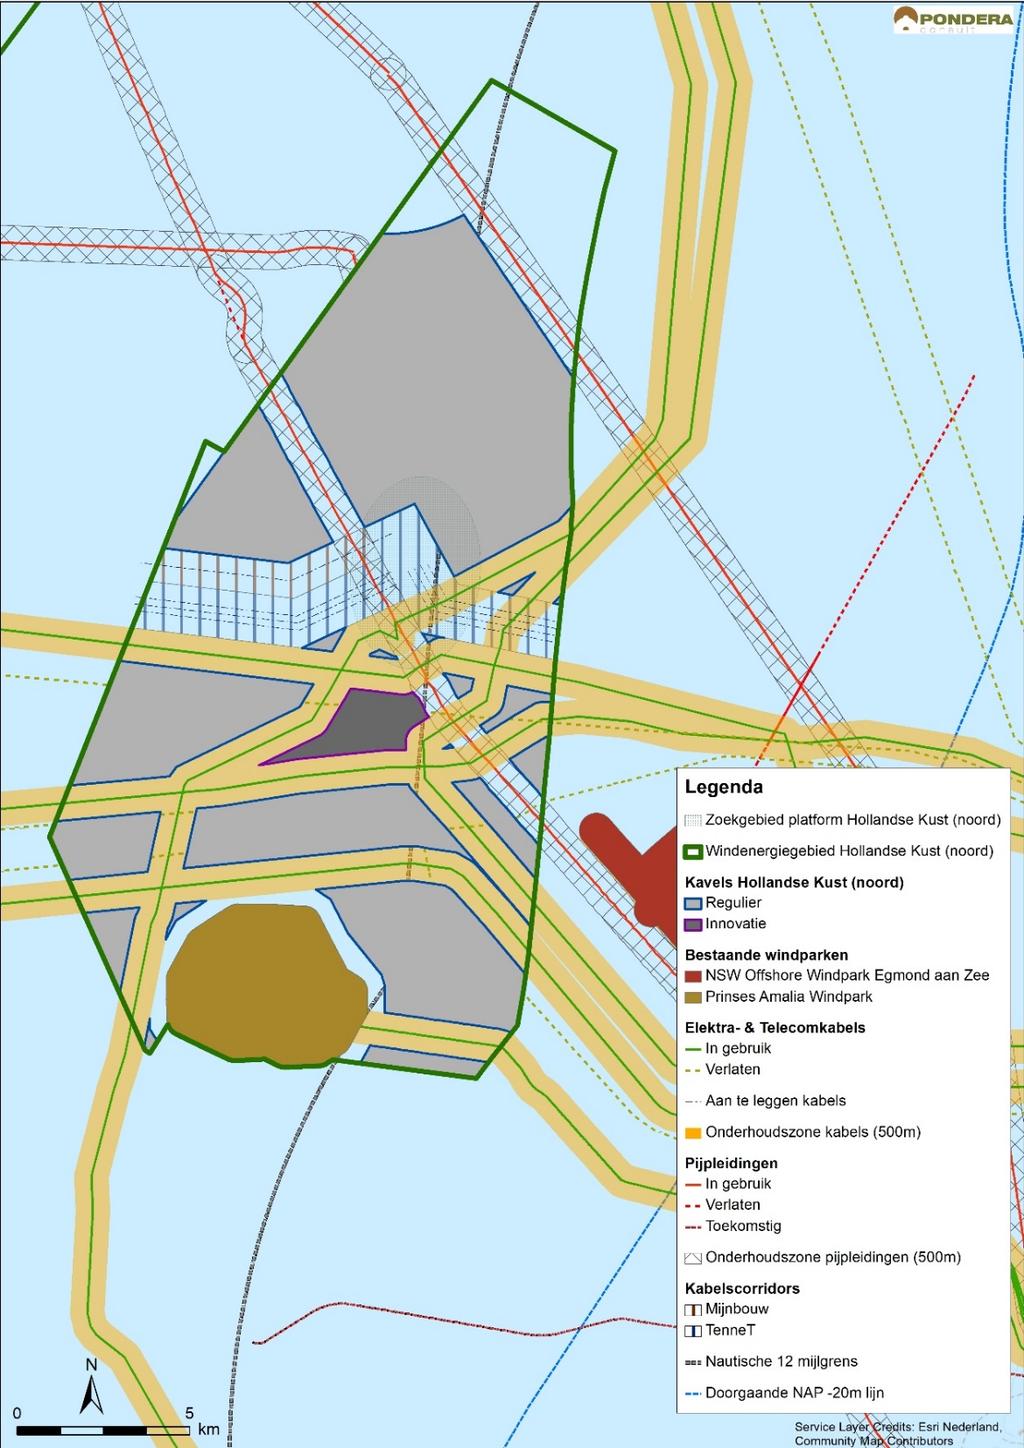 XXXV Figure S2 Proposed division of the Hollandse Kust (noord) wind farm zone In the letter of 19 May 2015 (Parliamentary Papers II, 2014-15, 33 561, no.